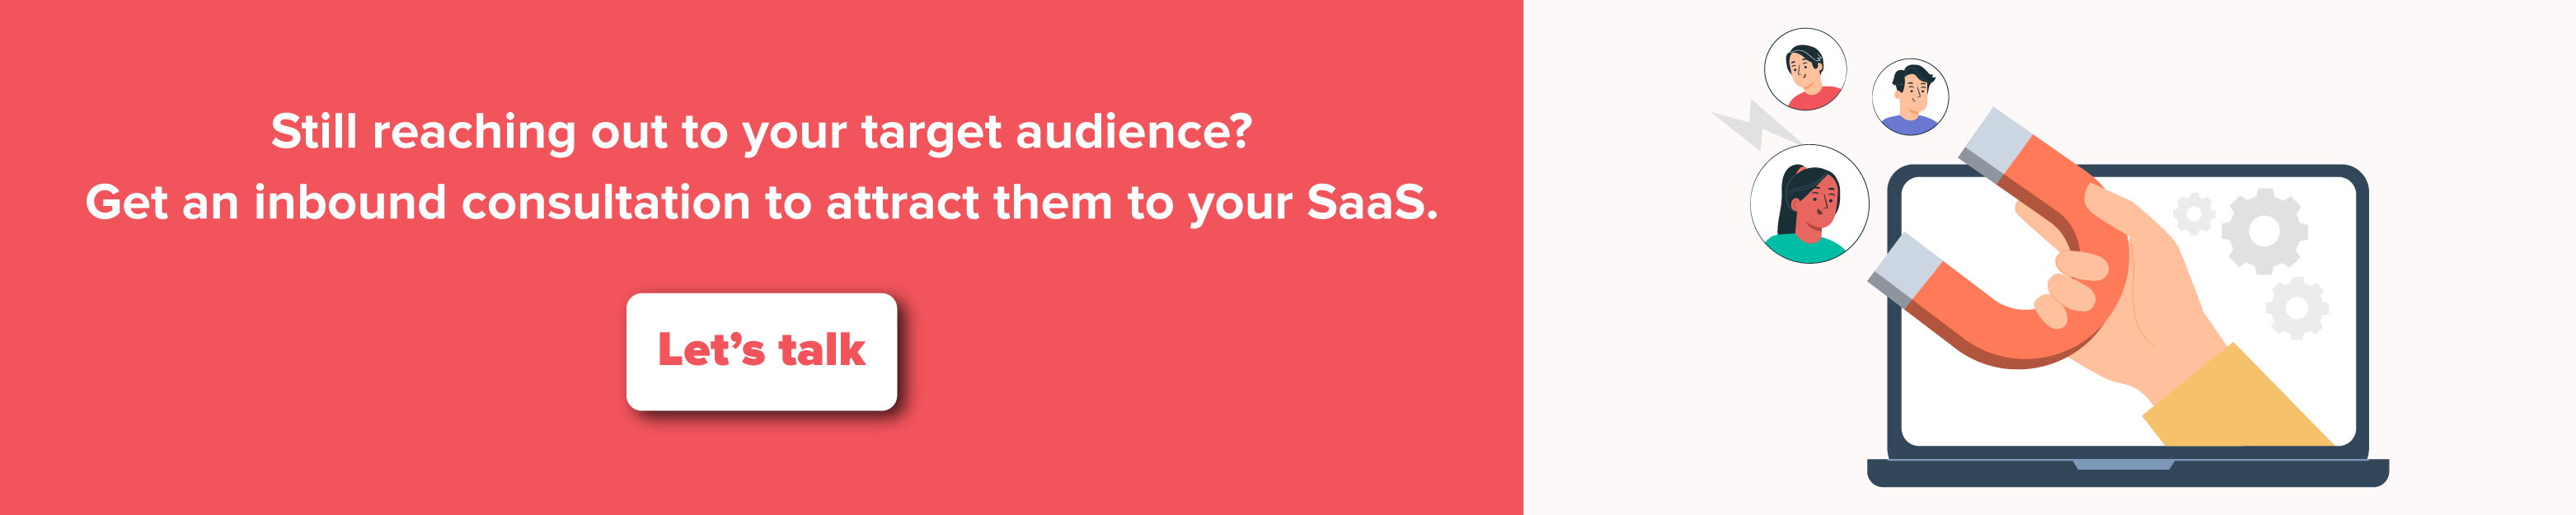 Still-reaching-out-to-your-target-audience-?-Get-an-inbound-consultation-to-attract-them-to-your-SaaS.